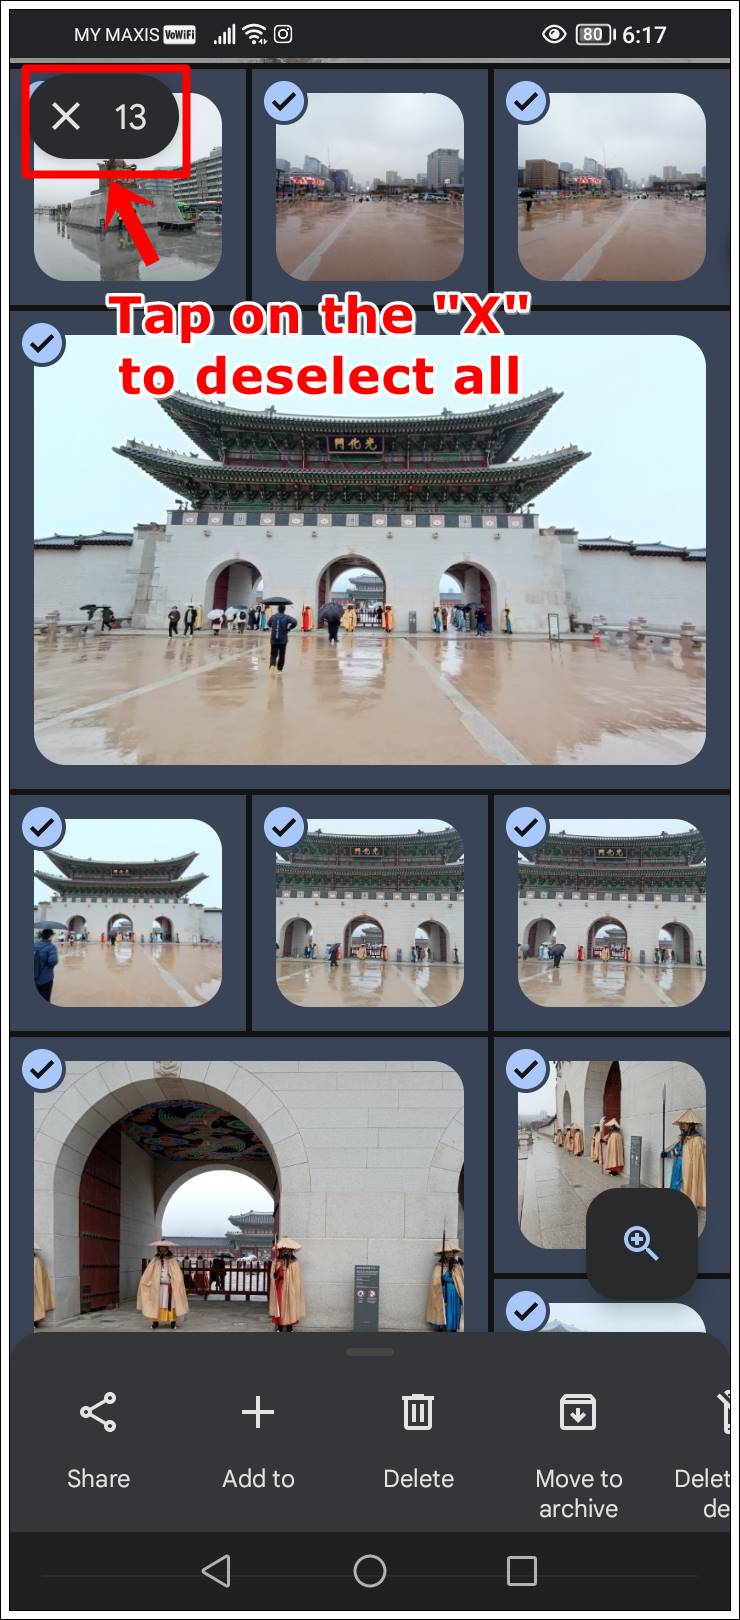 This screenshot from Google Photos on a mobile device displays several selected photos, each marked with a blue checkmark. The count of selected photos at the top left is highlighted, suggesting that tapping on the 'X' will deselect all the selected photos.